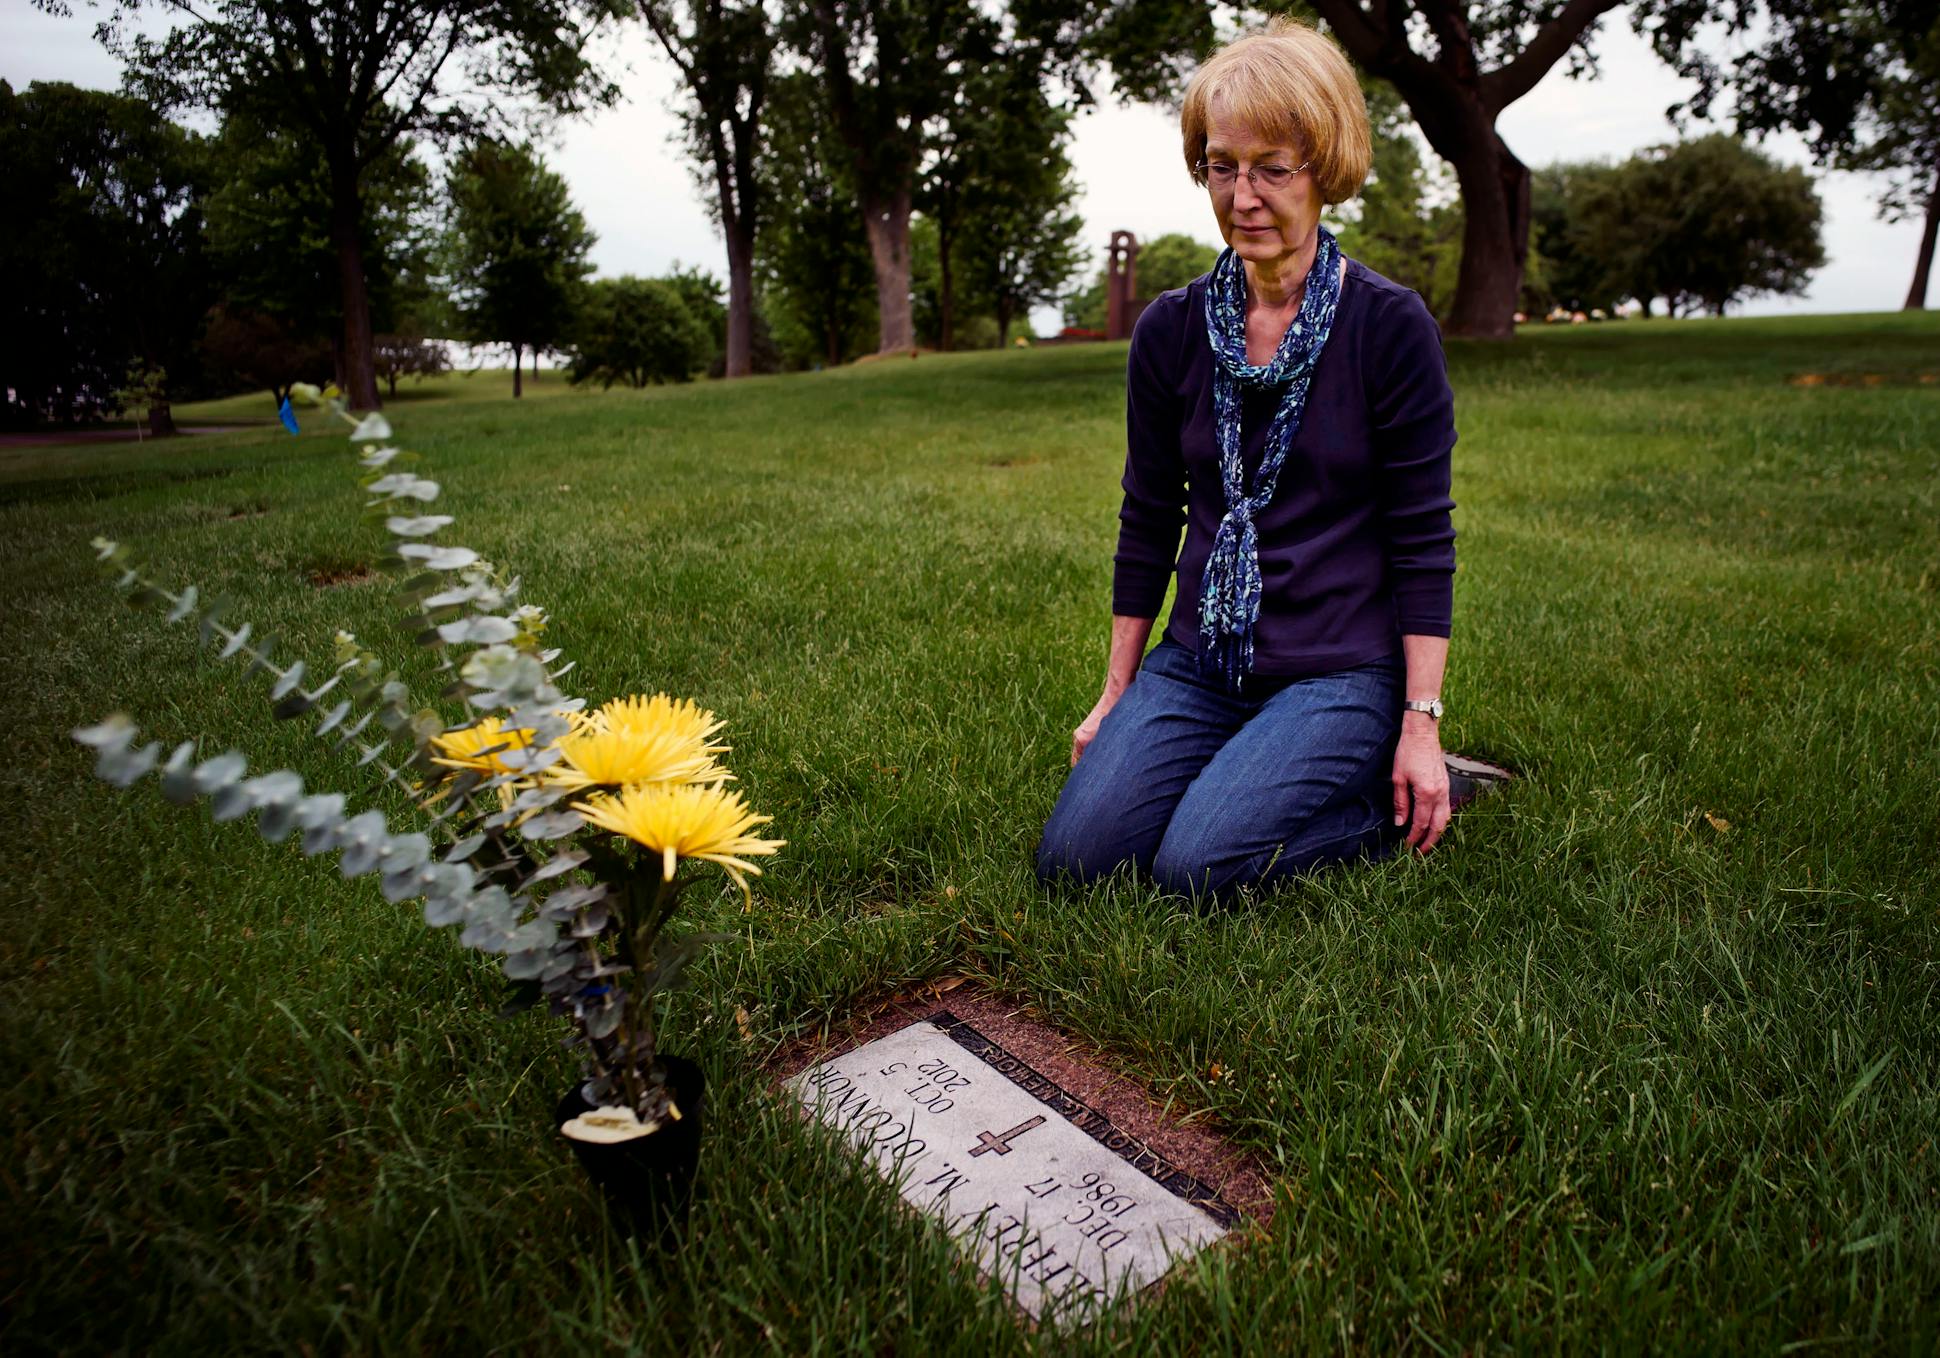 Beckie O'Connor visited her son Jeff's grave at Lakewood Cemetery in Minneapolis. She said she thinks her son would be alive had police handed the situation differently — and she's determined to get officers trained to do that.